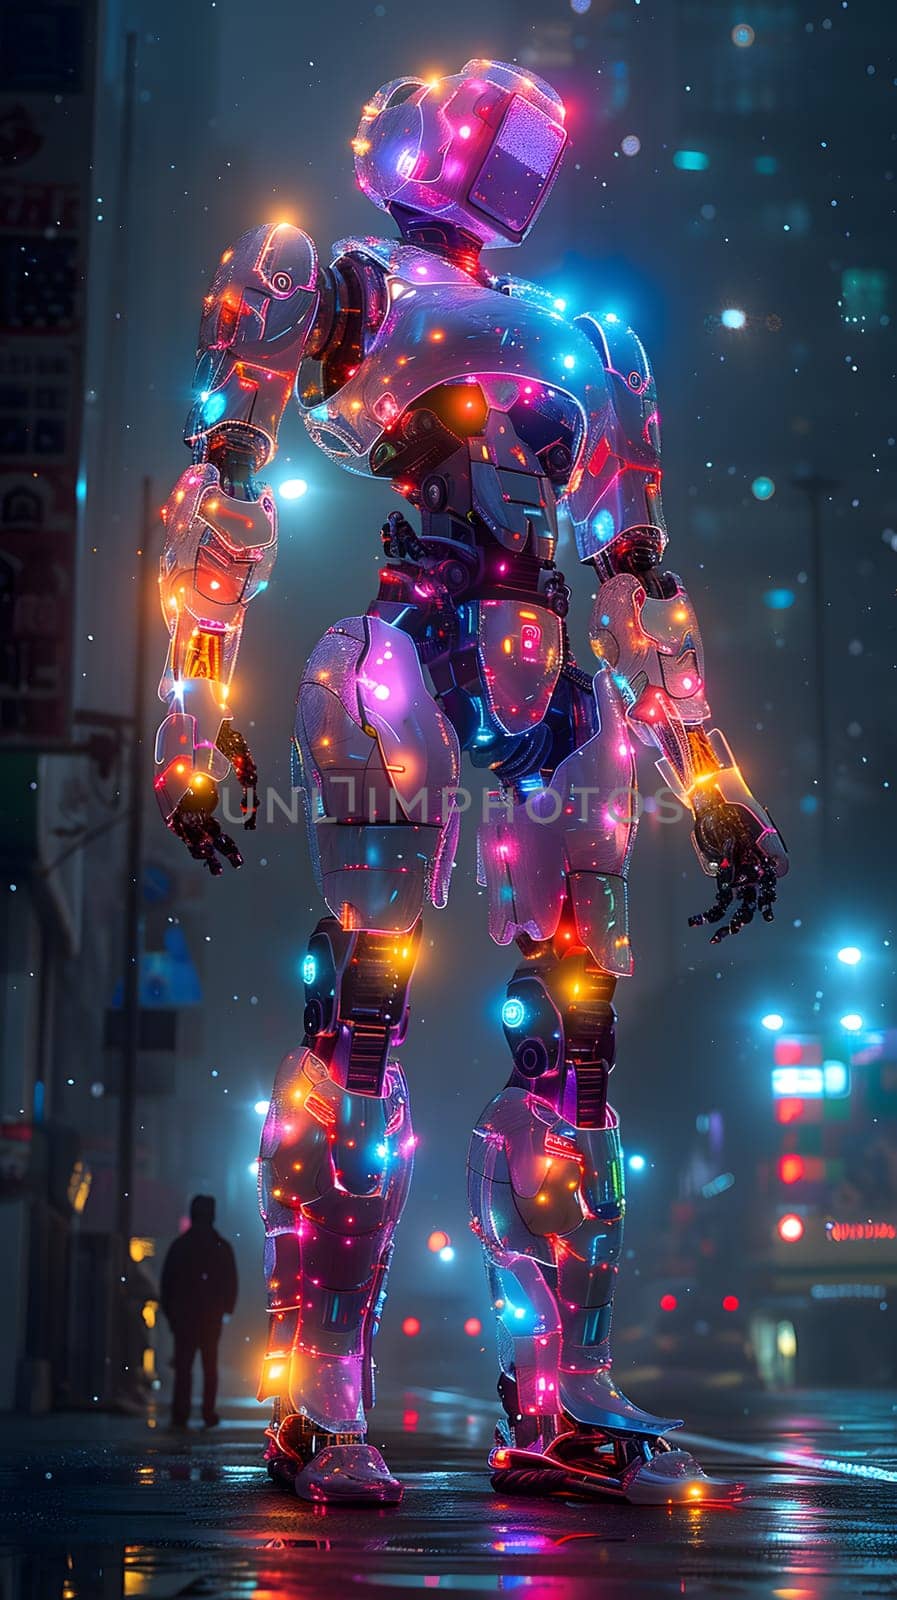 A robot adorned with purple, electric blue automotive lighting stands on a city street at night, creating a festive and eyecatching display for passersby to enjoy during the holiday event